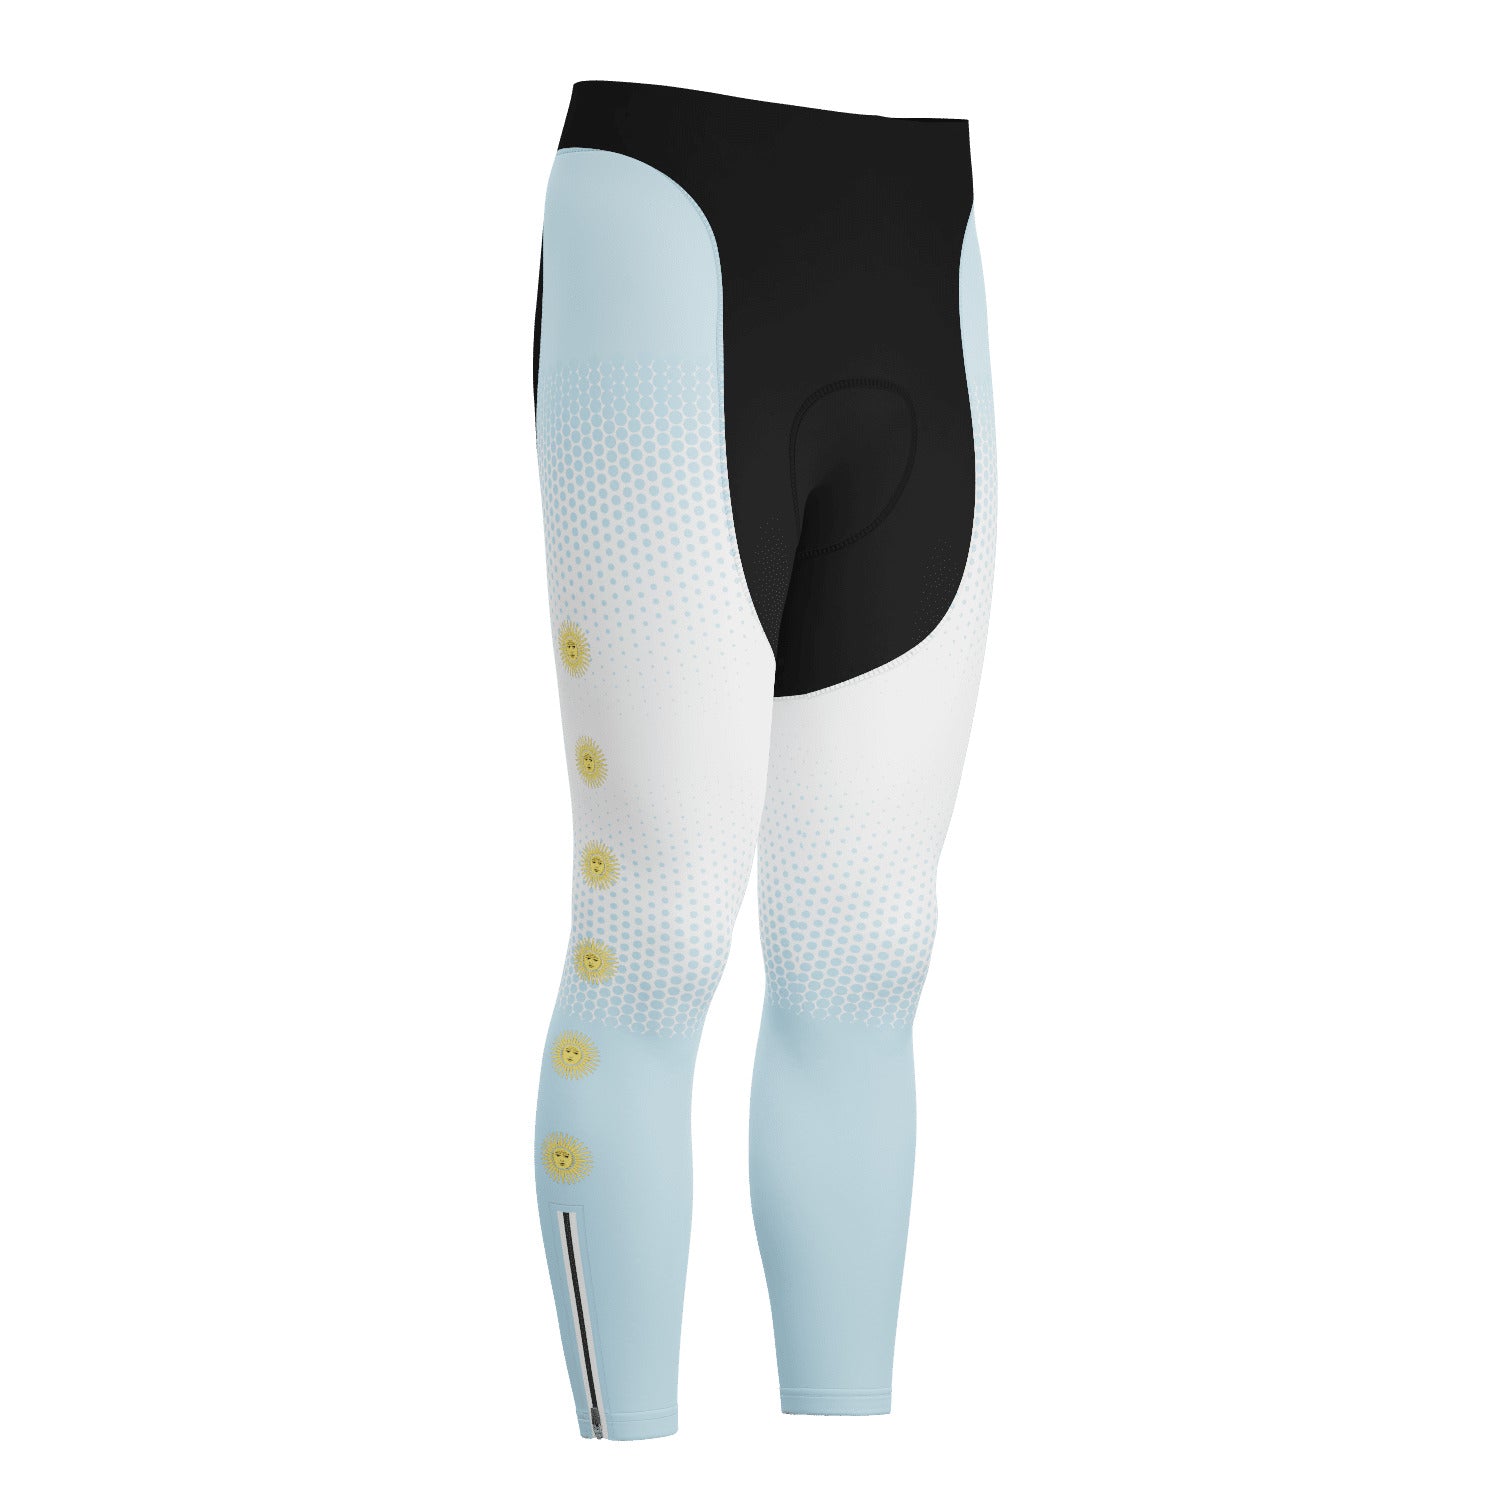 Men's World Countries Team Argentina Icon Gel Padded Cycling Bib-Tights